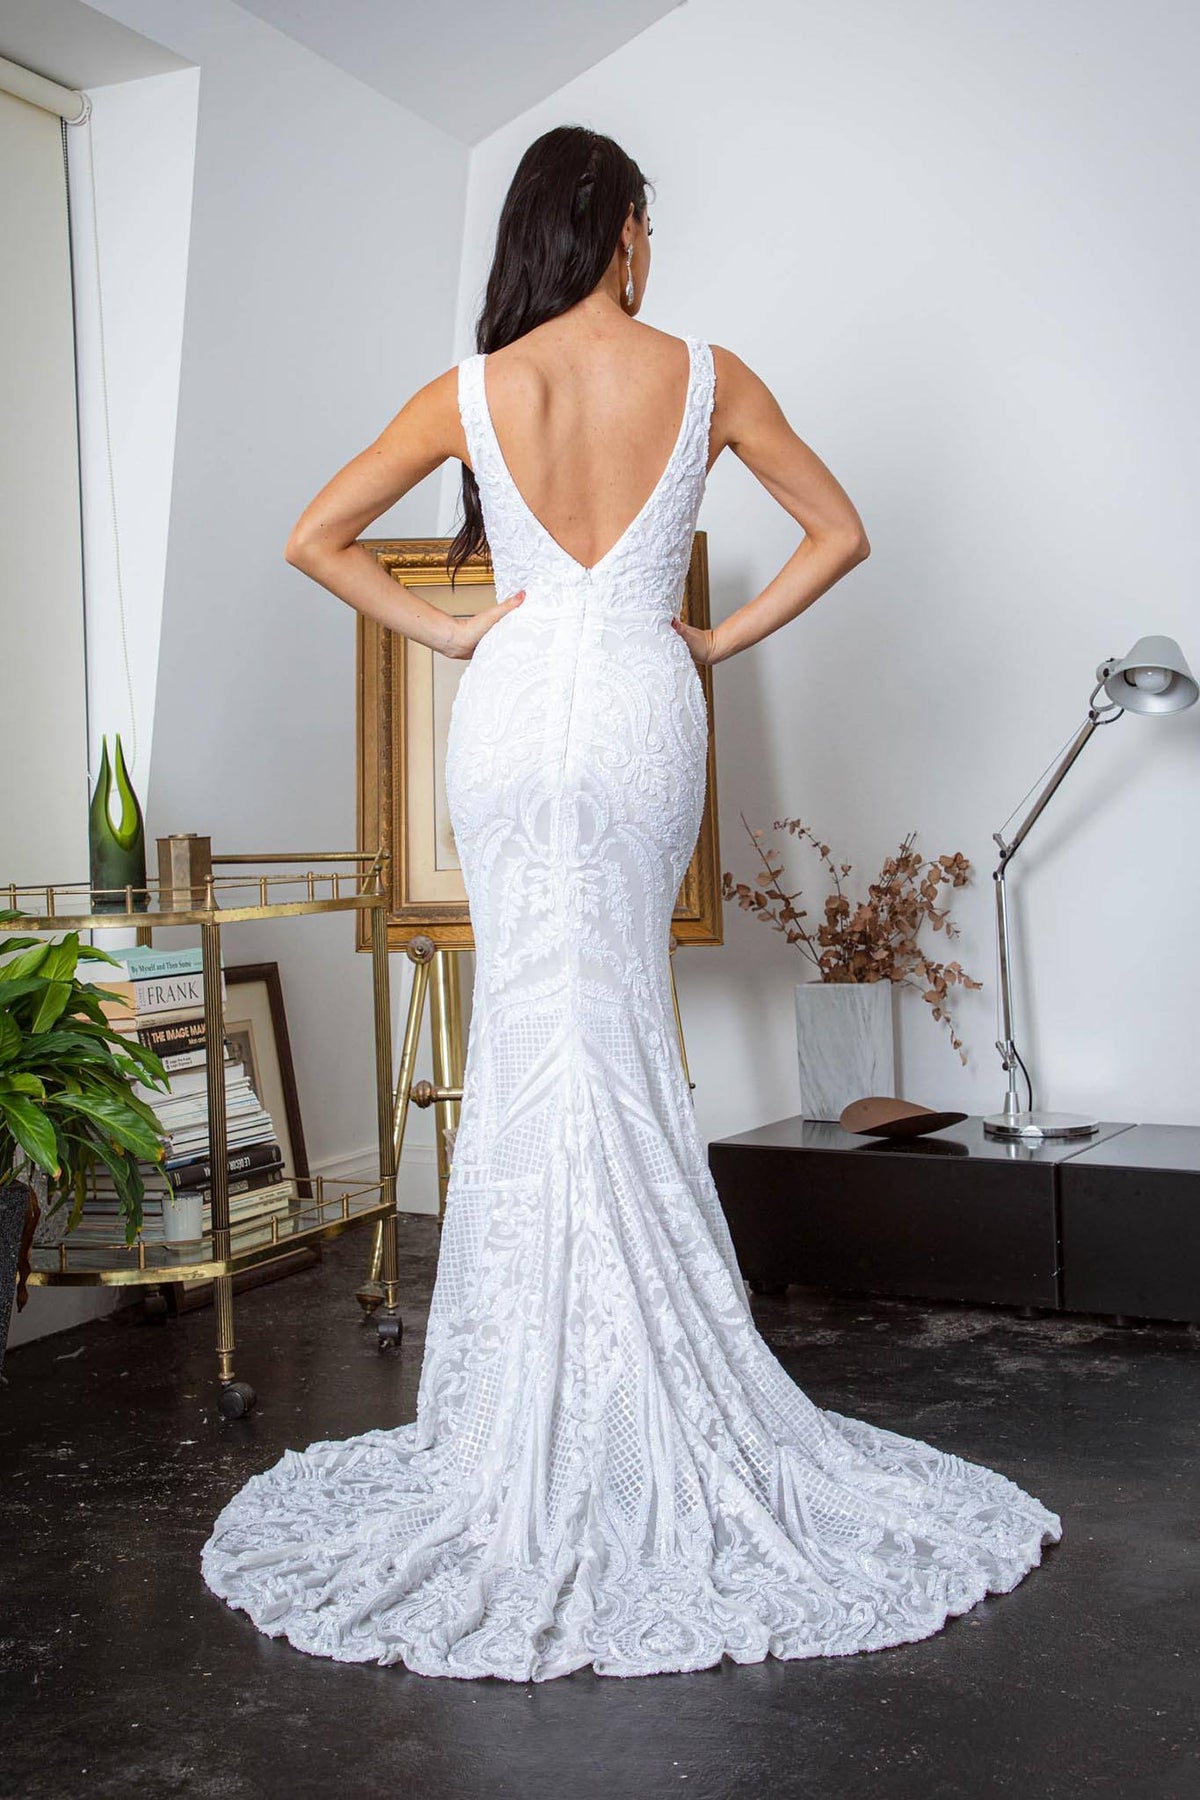 Open Back and Sweep Train Design of White Embroidered Pattern Sequin Floor Length Sleeveless Evening Dress with V-Neckline and Fit and Flare Mermaid Skirt